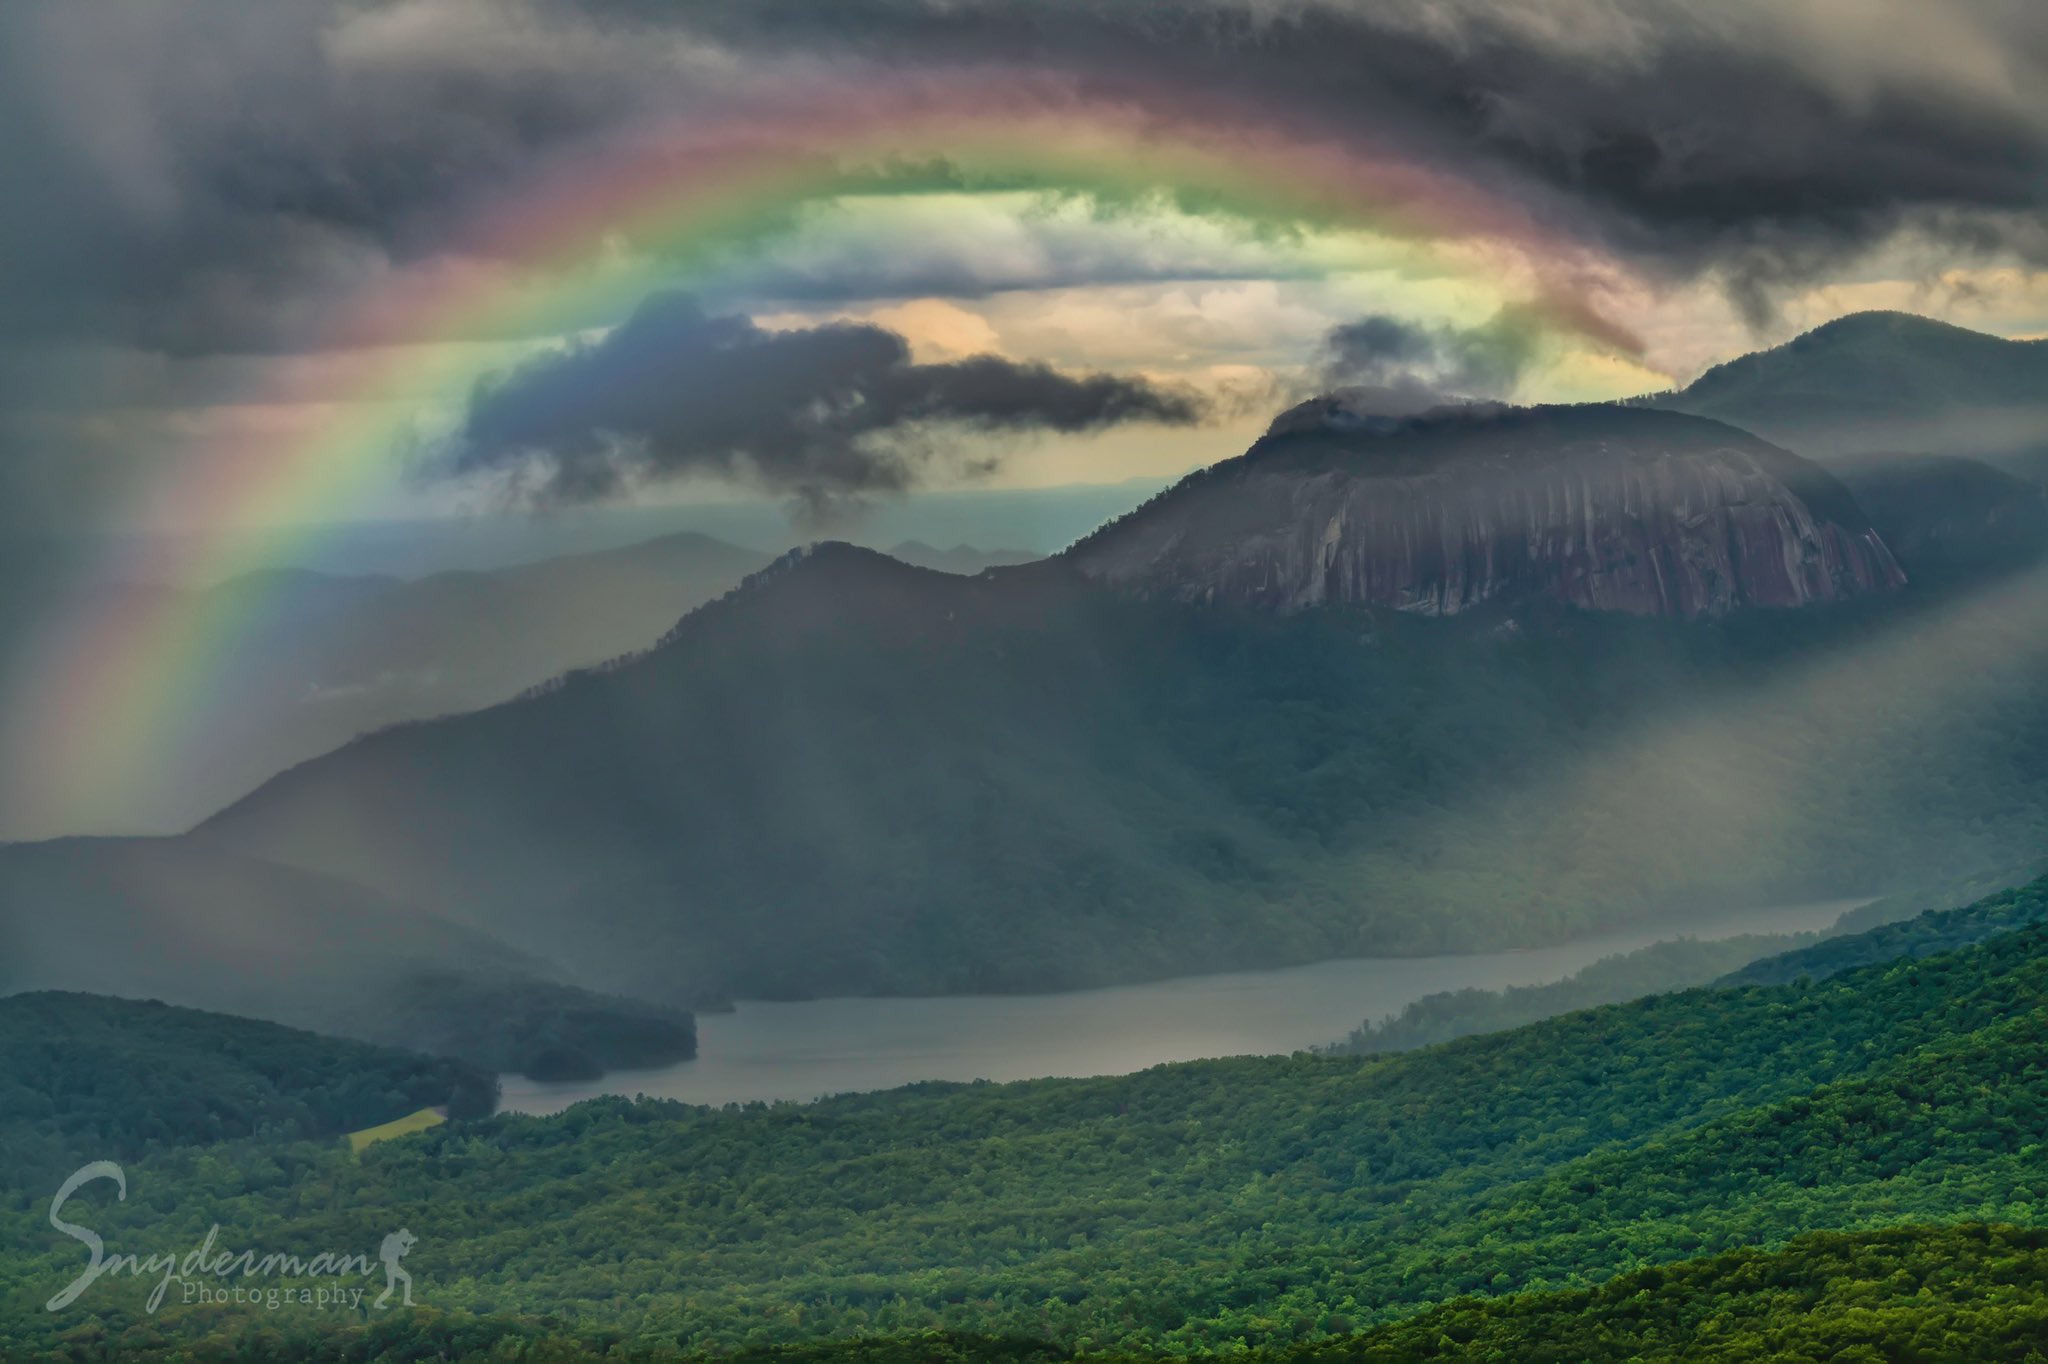 1st Place Rainbow over Table Rock Reservoir in upstate South Carolina by SnydermanPhotography @SnydermanPhotos